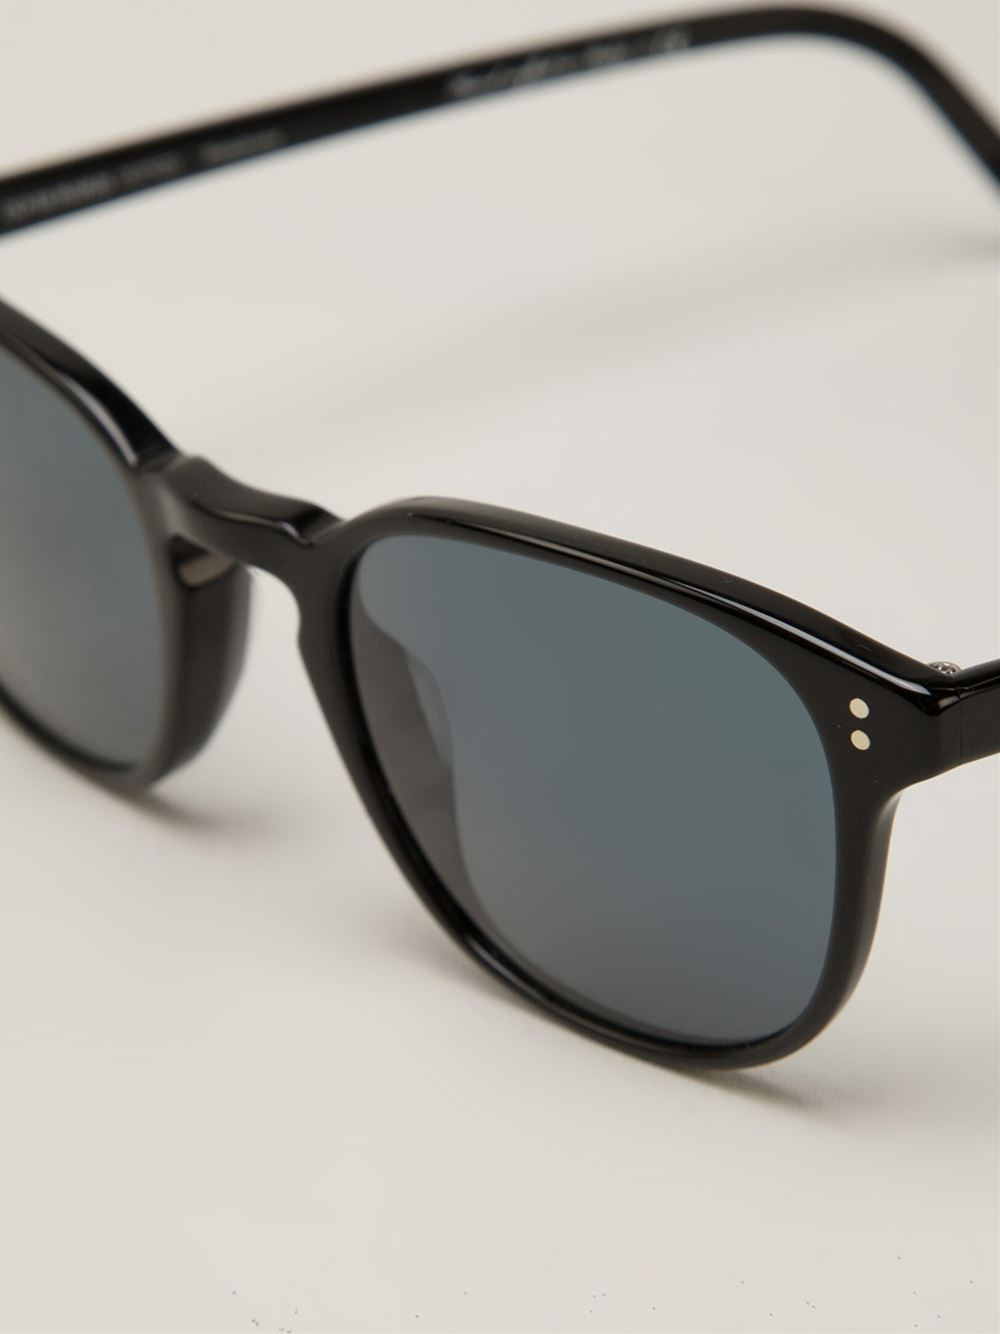 Oliver Peoples Official Site Shop Our Musthave Designs